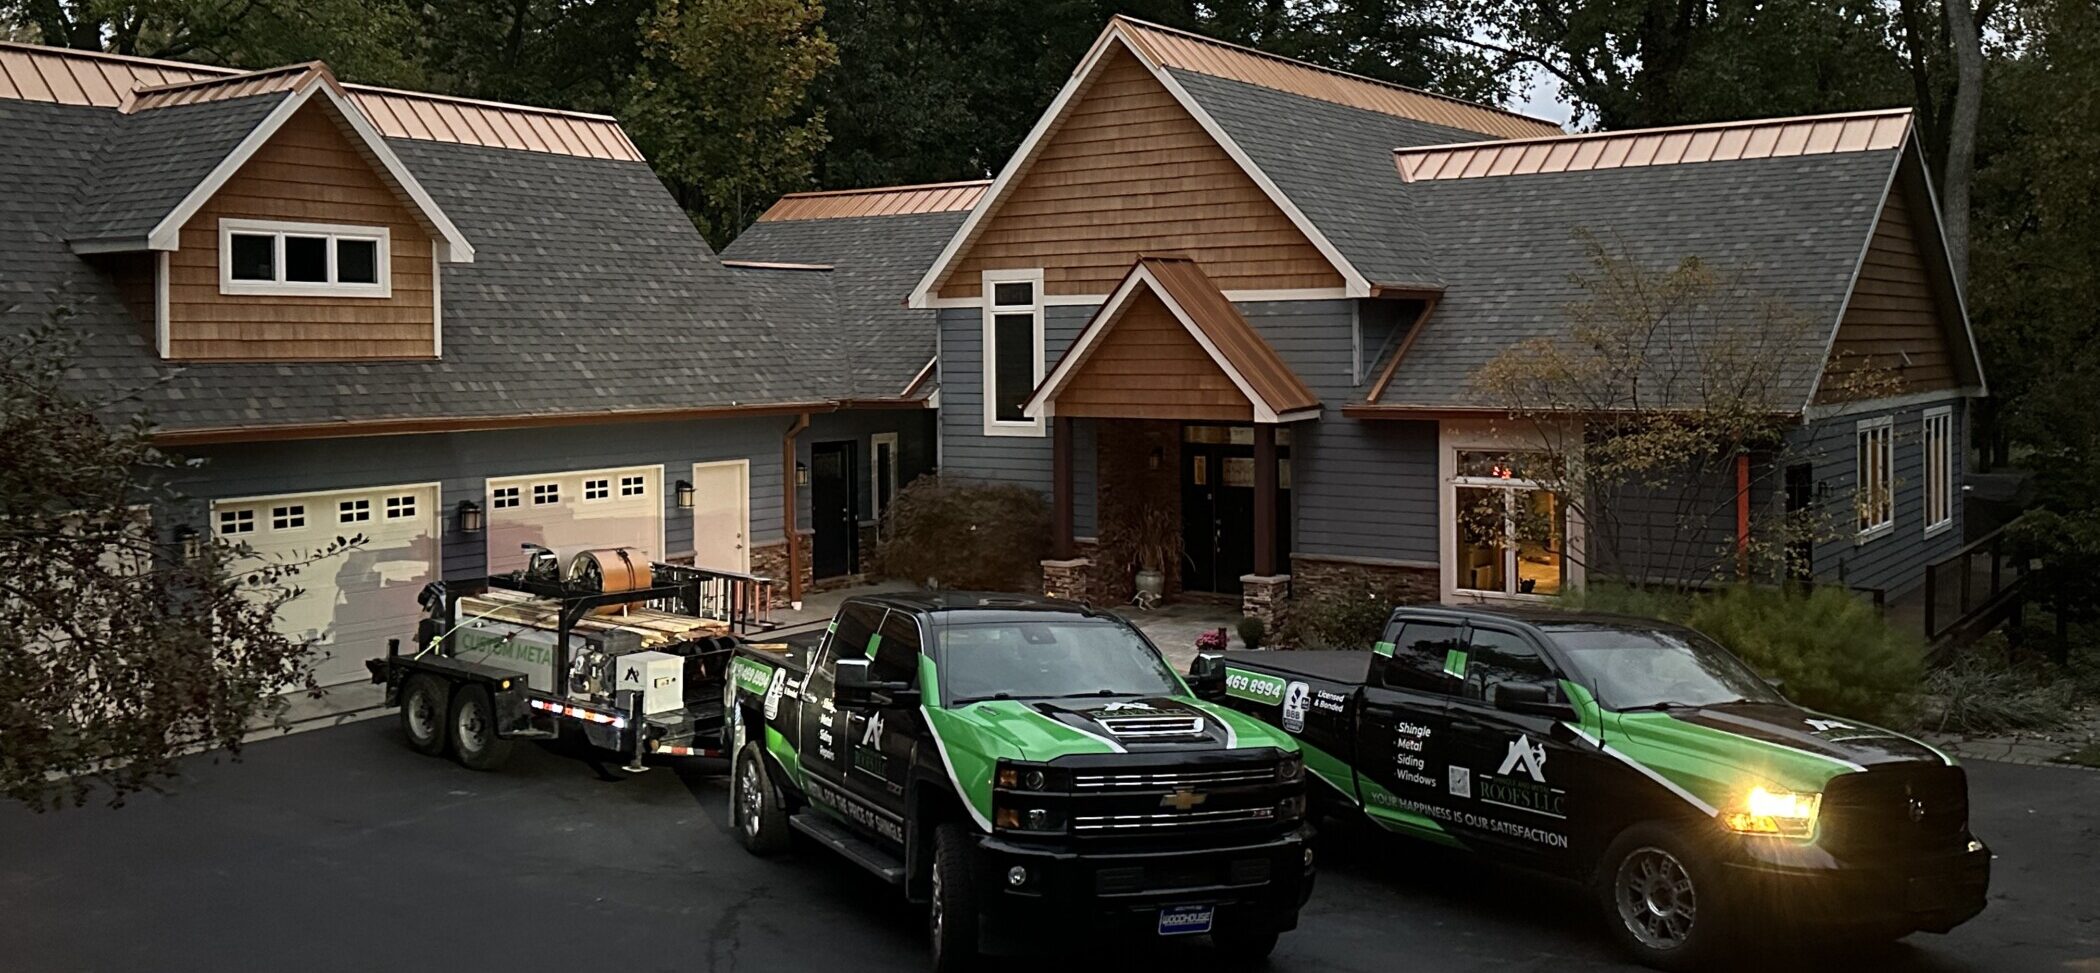 Shingle and Metal Roofs company trucks in front of a recently installed shingle roof with copper ridge cap featuring installation by Shingle and Metal Roofs